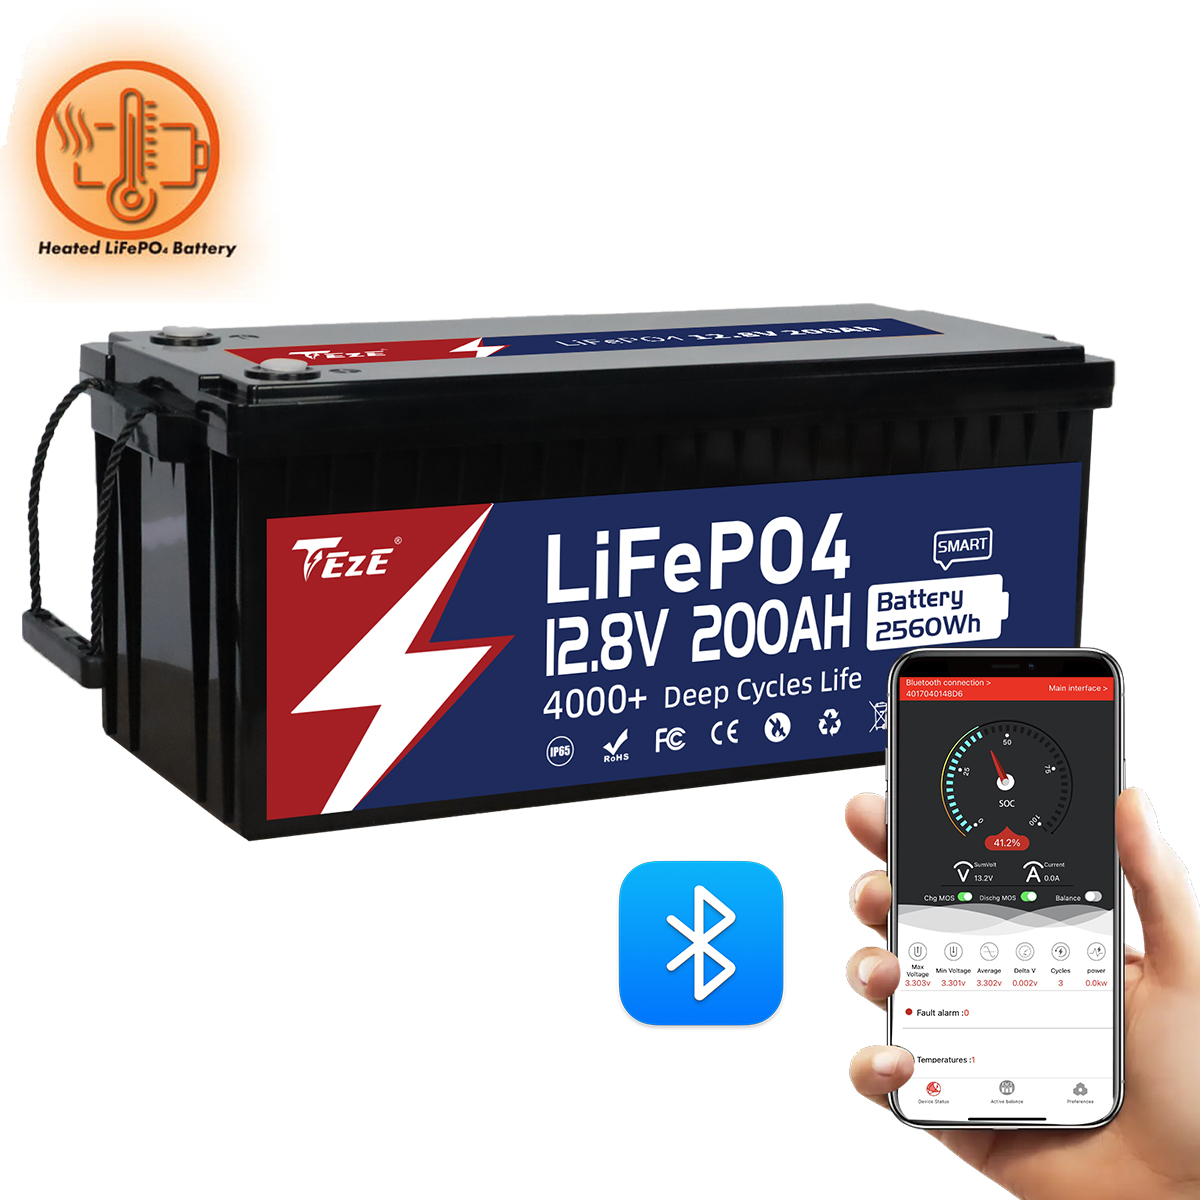 TezePower 12V 200Ah LiFePO4 Battery with Bluetooth, Self-heating and Active Balancer, Built-in 200A Daly BMS(Bluetooth Built-in Version)-TezePower